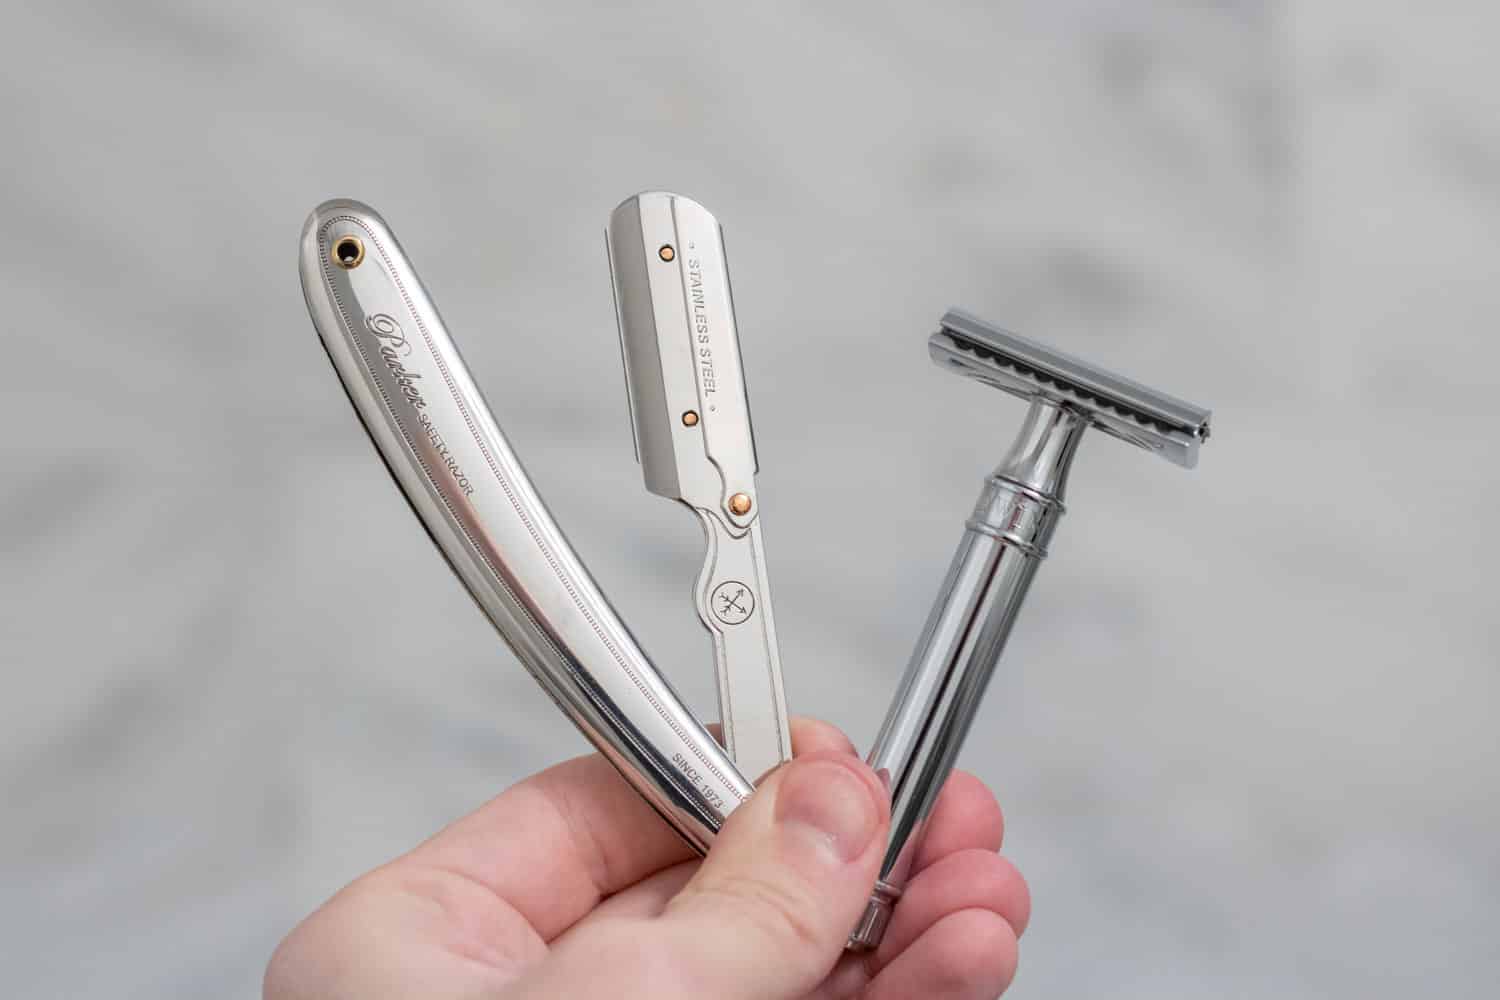 holding both a shavette and safety razor on one hand